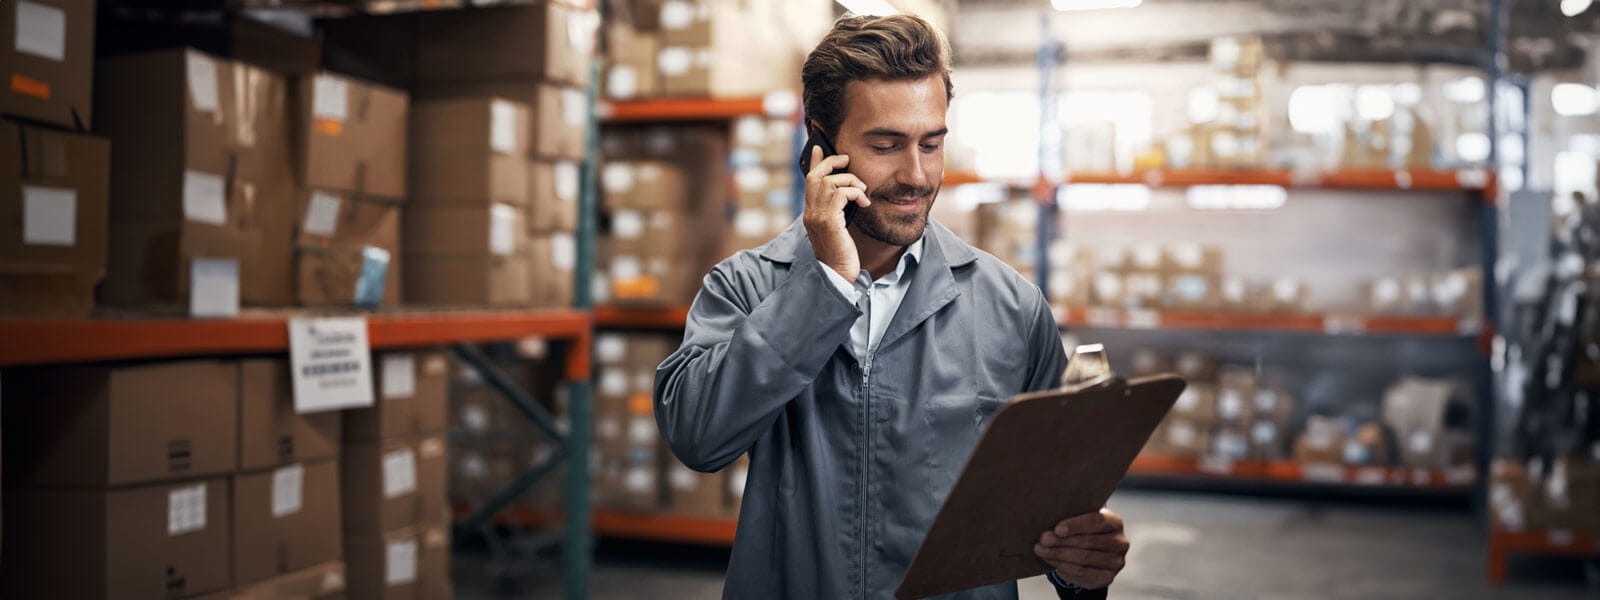 male manager in a jumpsuit looking at an inventory supply list in a warehouse